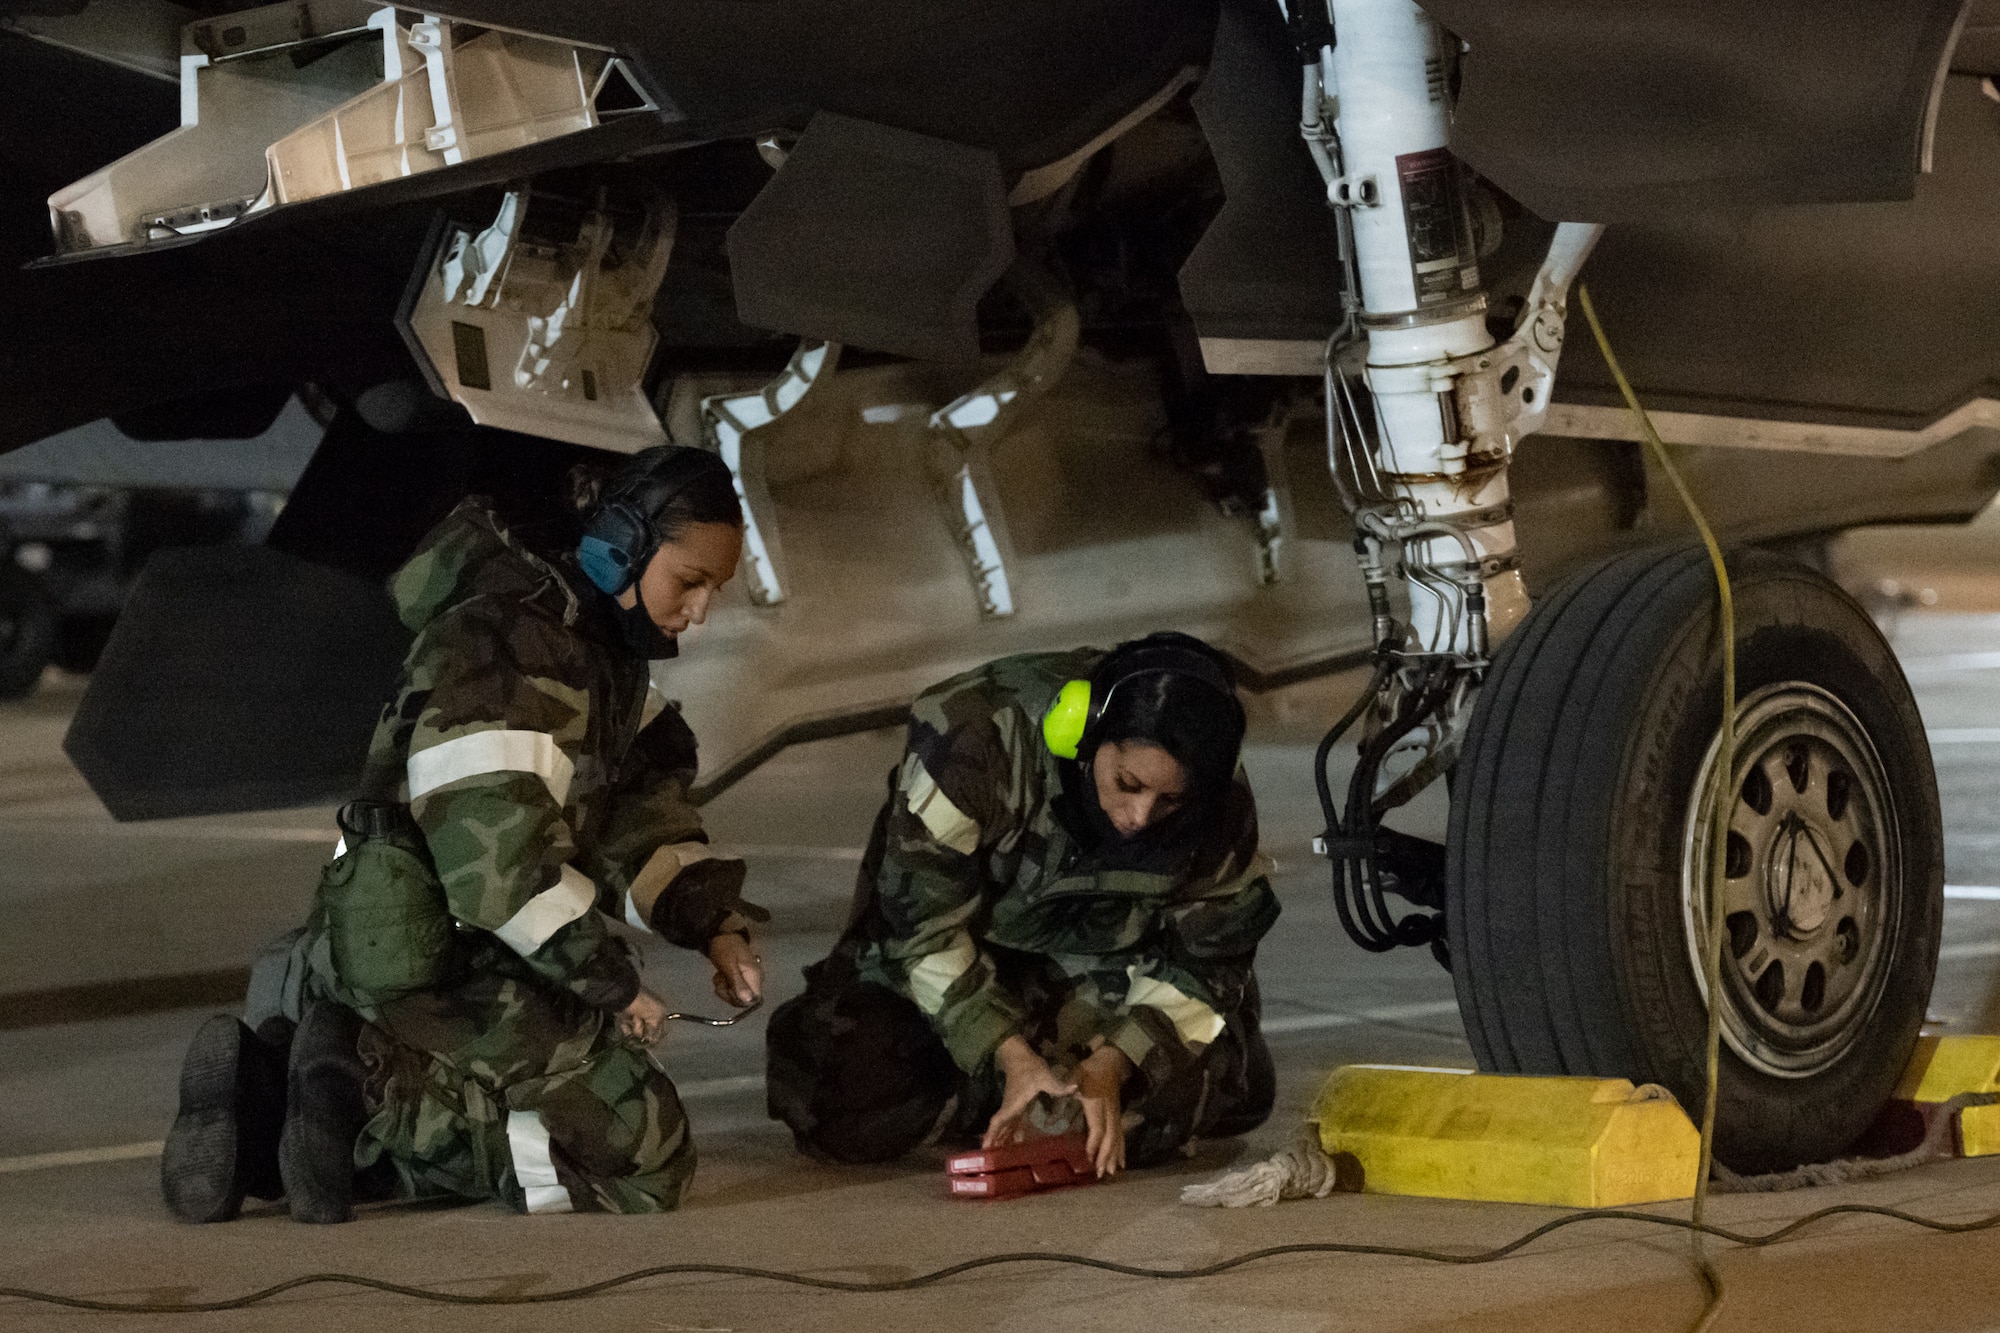 Senior Airman Deneen Clark and Staff Sgt. Aften Garcia, weapon loaders in the 419th Aircraft Maintenance Squadron, prepare an F-35A Lightning II to receive flares during an exercise